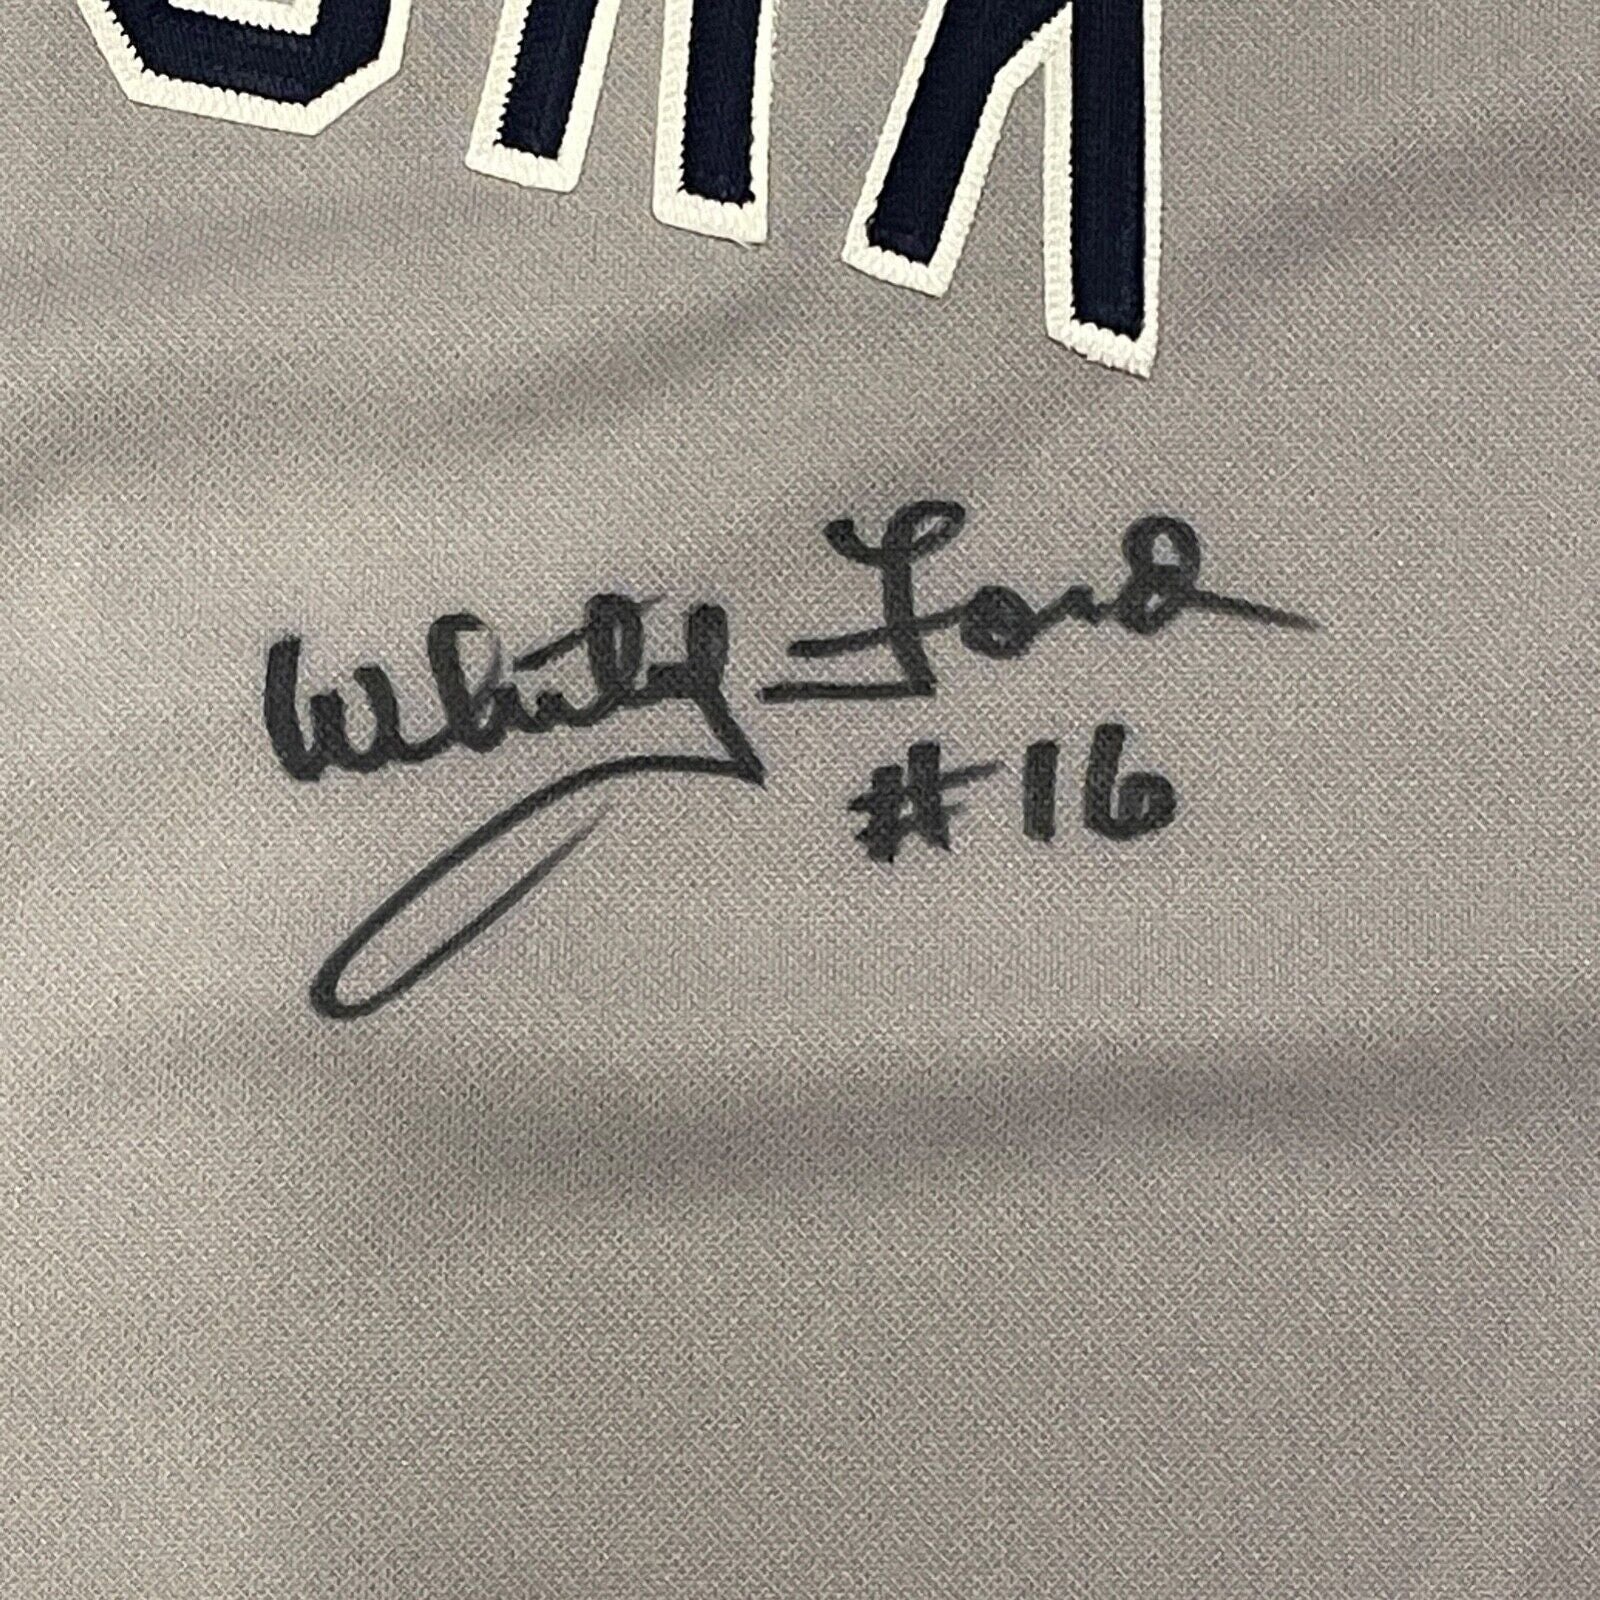 Whitey Ford Signed Career Stats MLB Jersey. New York Yankees. TriStar